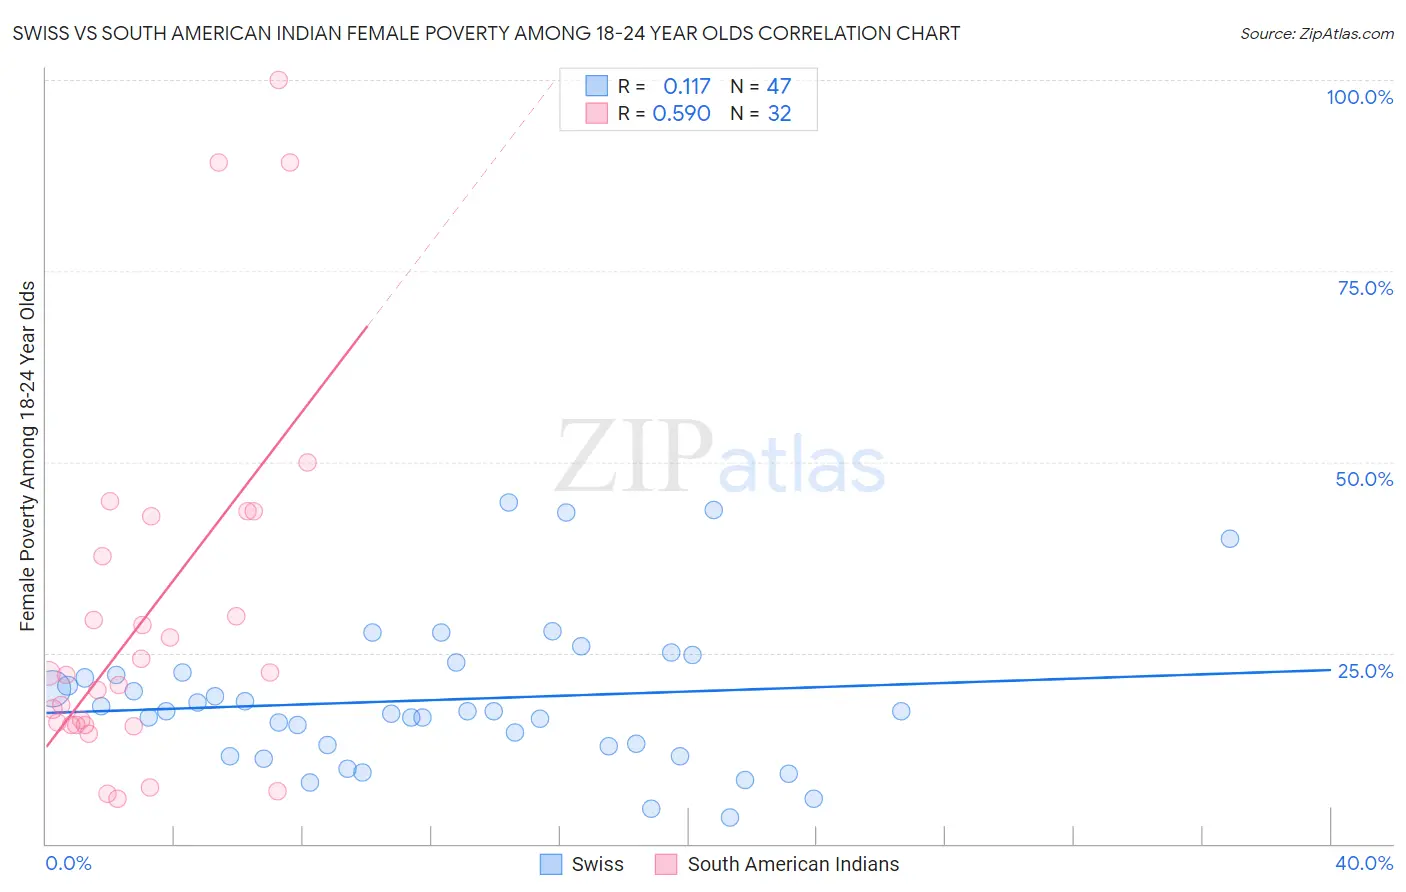 Swiss vs South American Indian Female Poverty Among 18-24 Year Olds